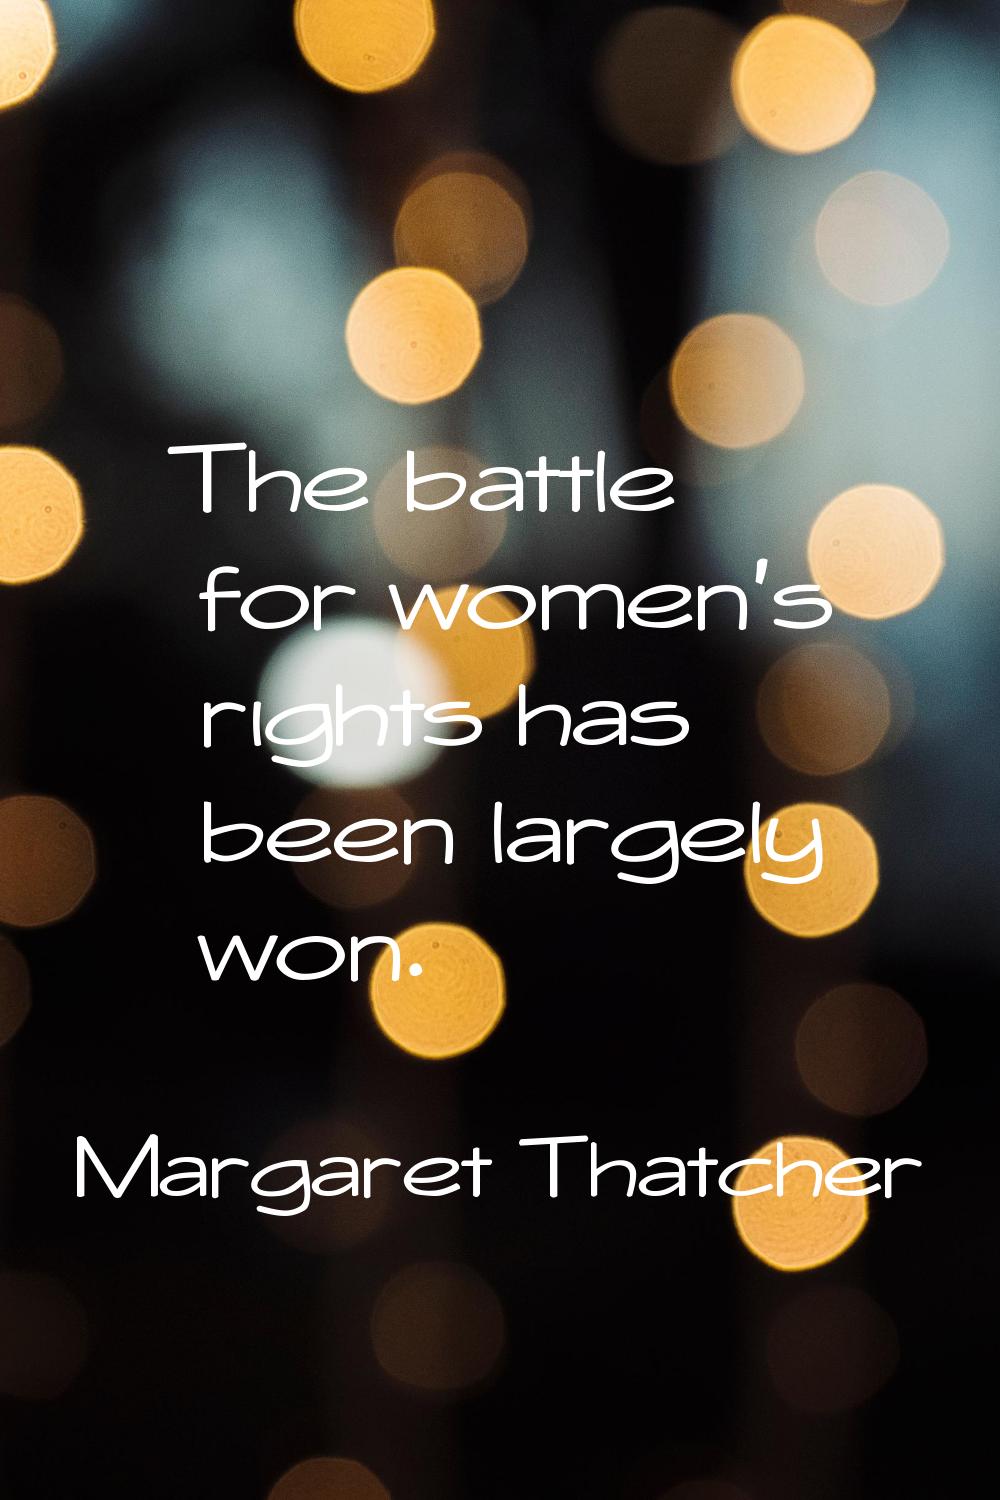 The battle for women's rights has been largely won.